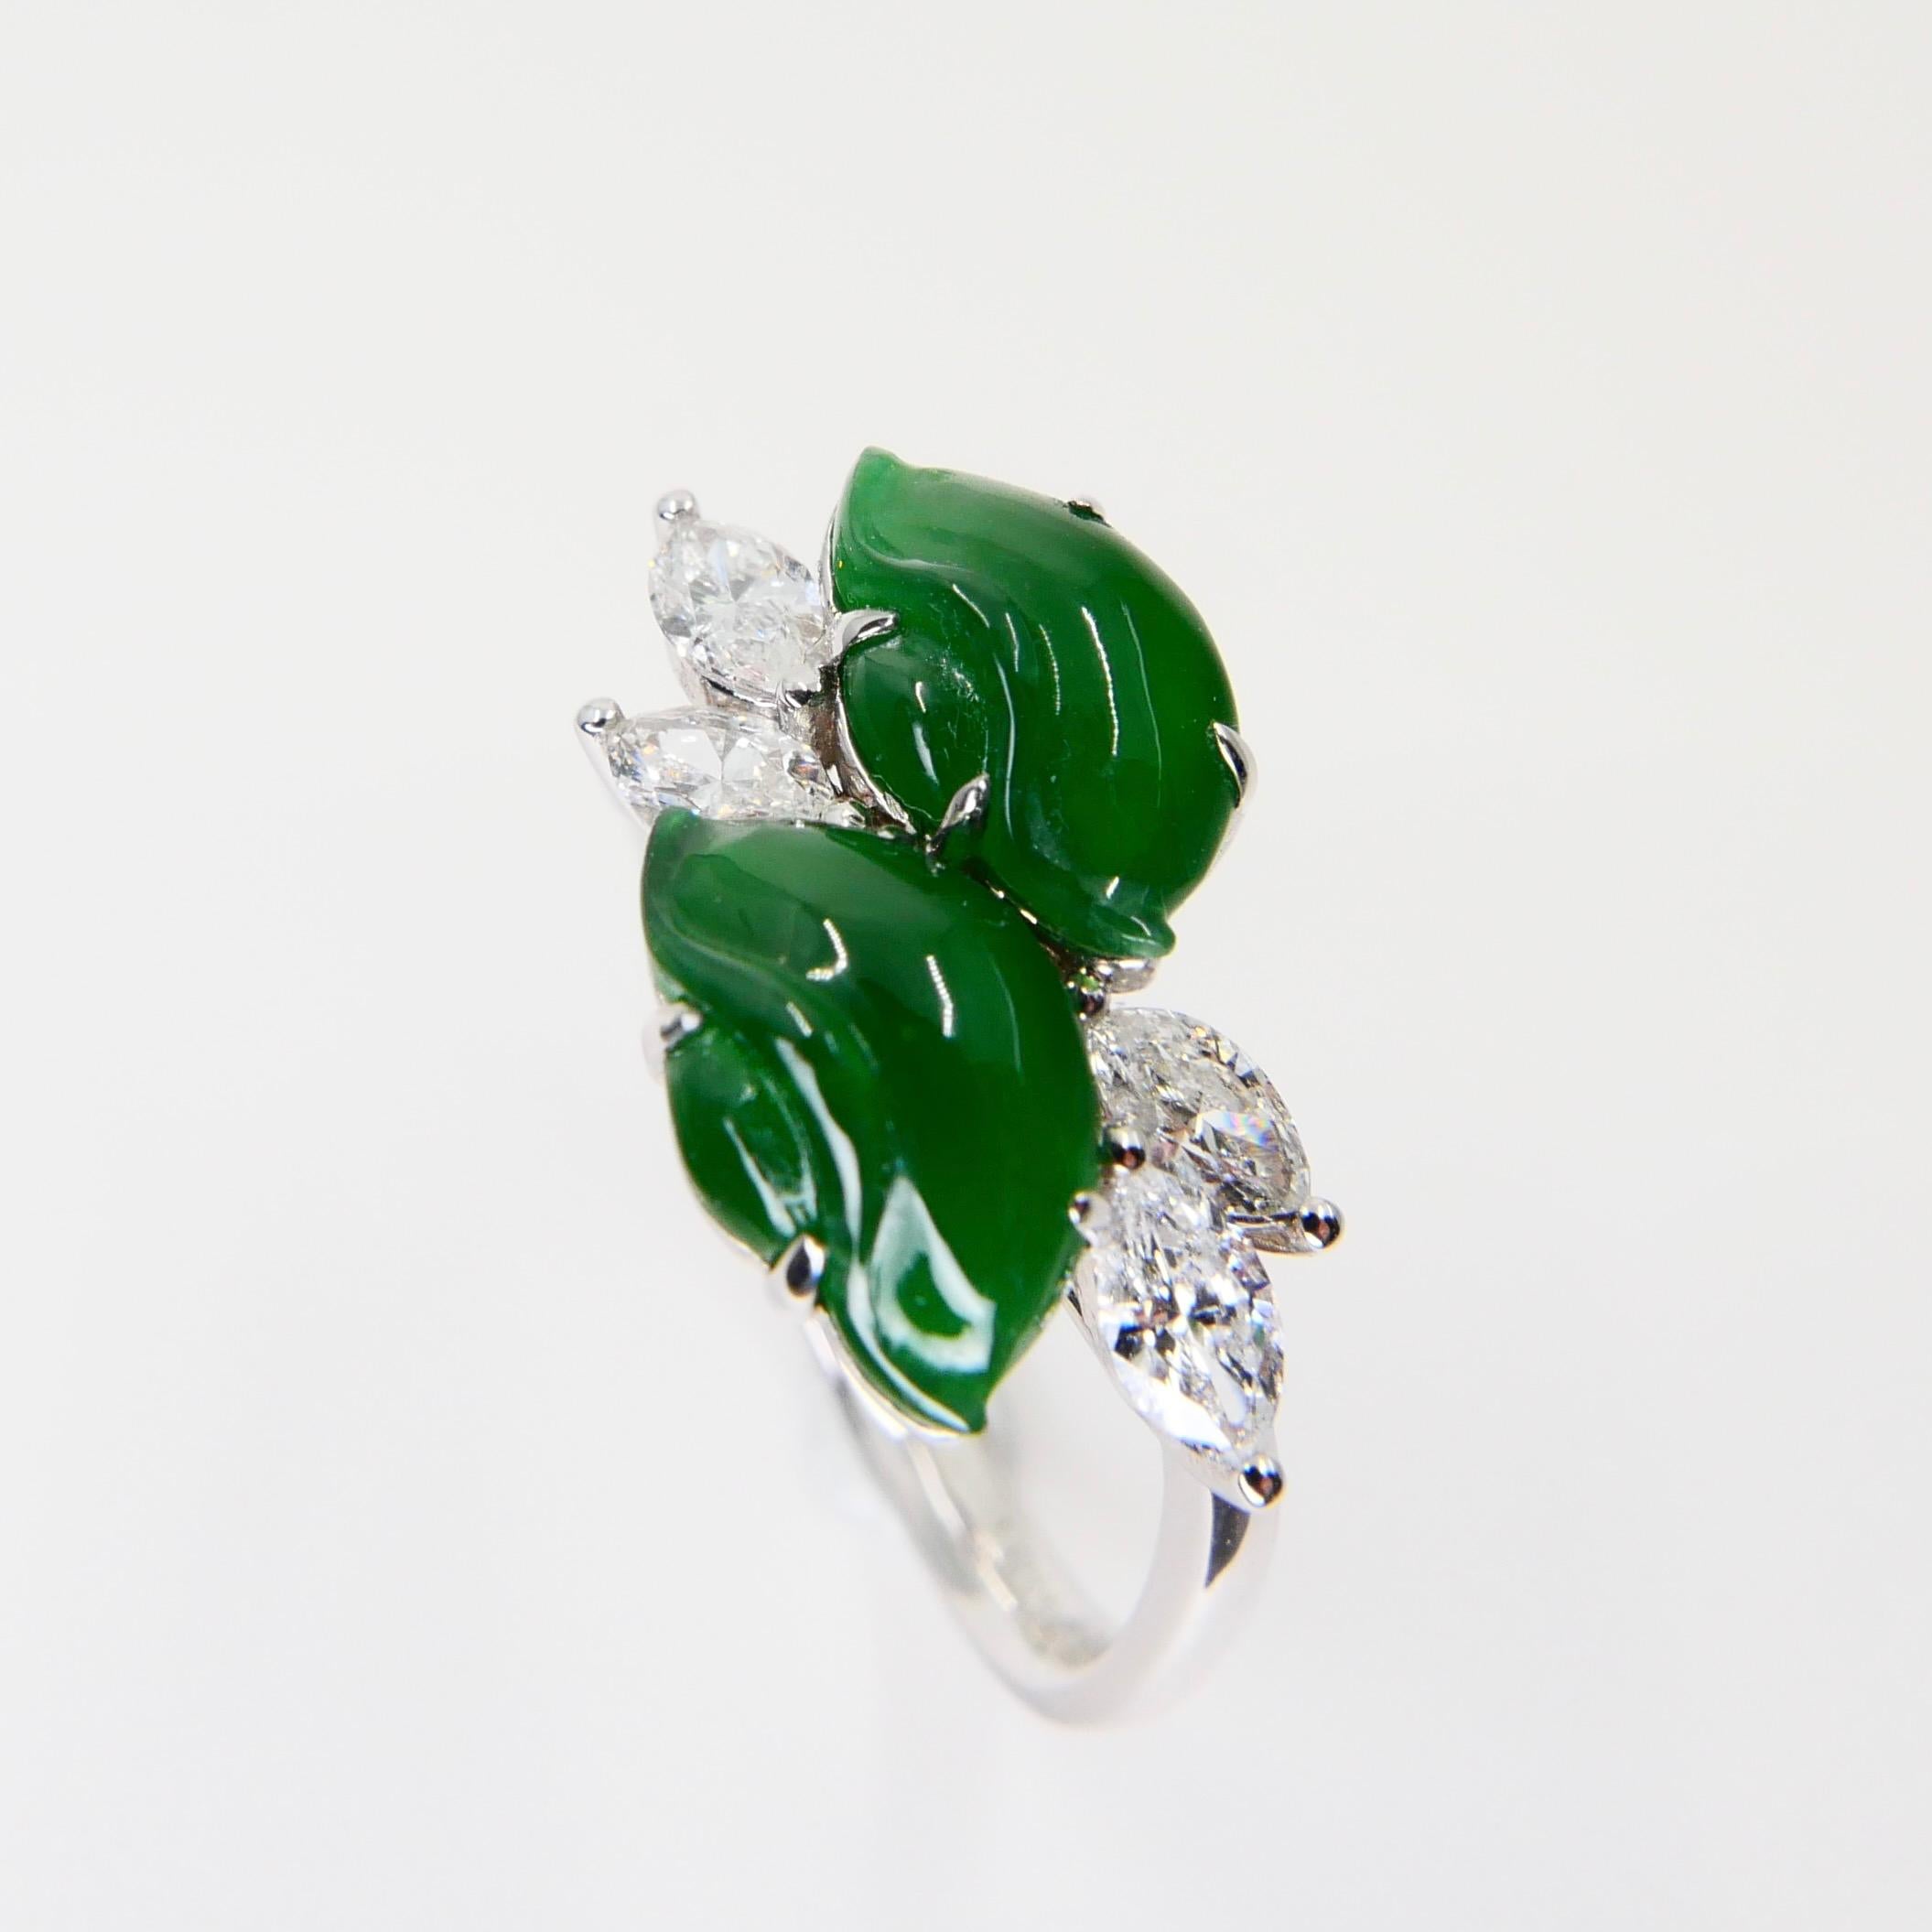 Certified Type A Jadeite Jade Ingot & Diamond Cocktail Ring, Imperial Green In New Condition For Sale In Hong Kong, HK